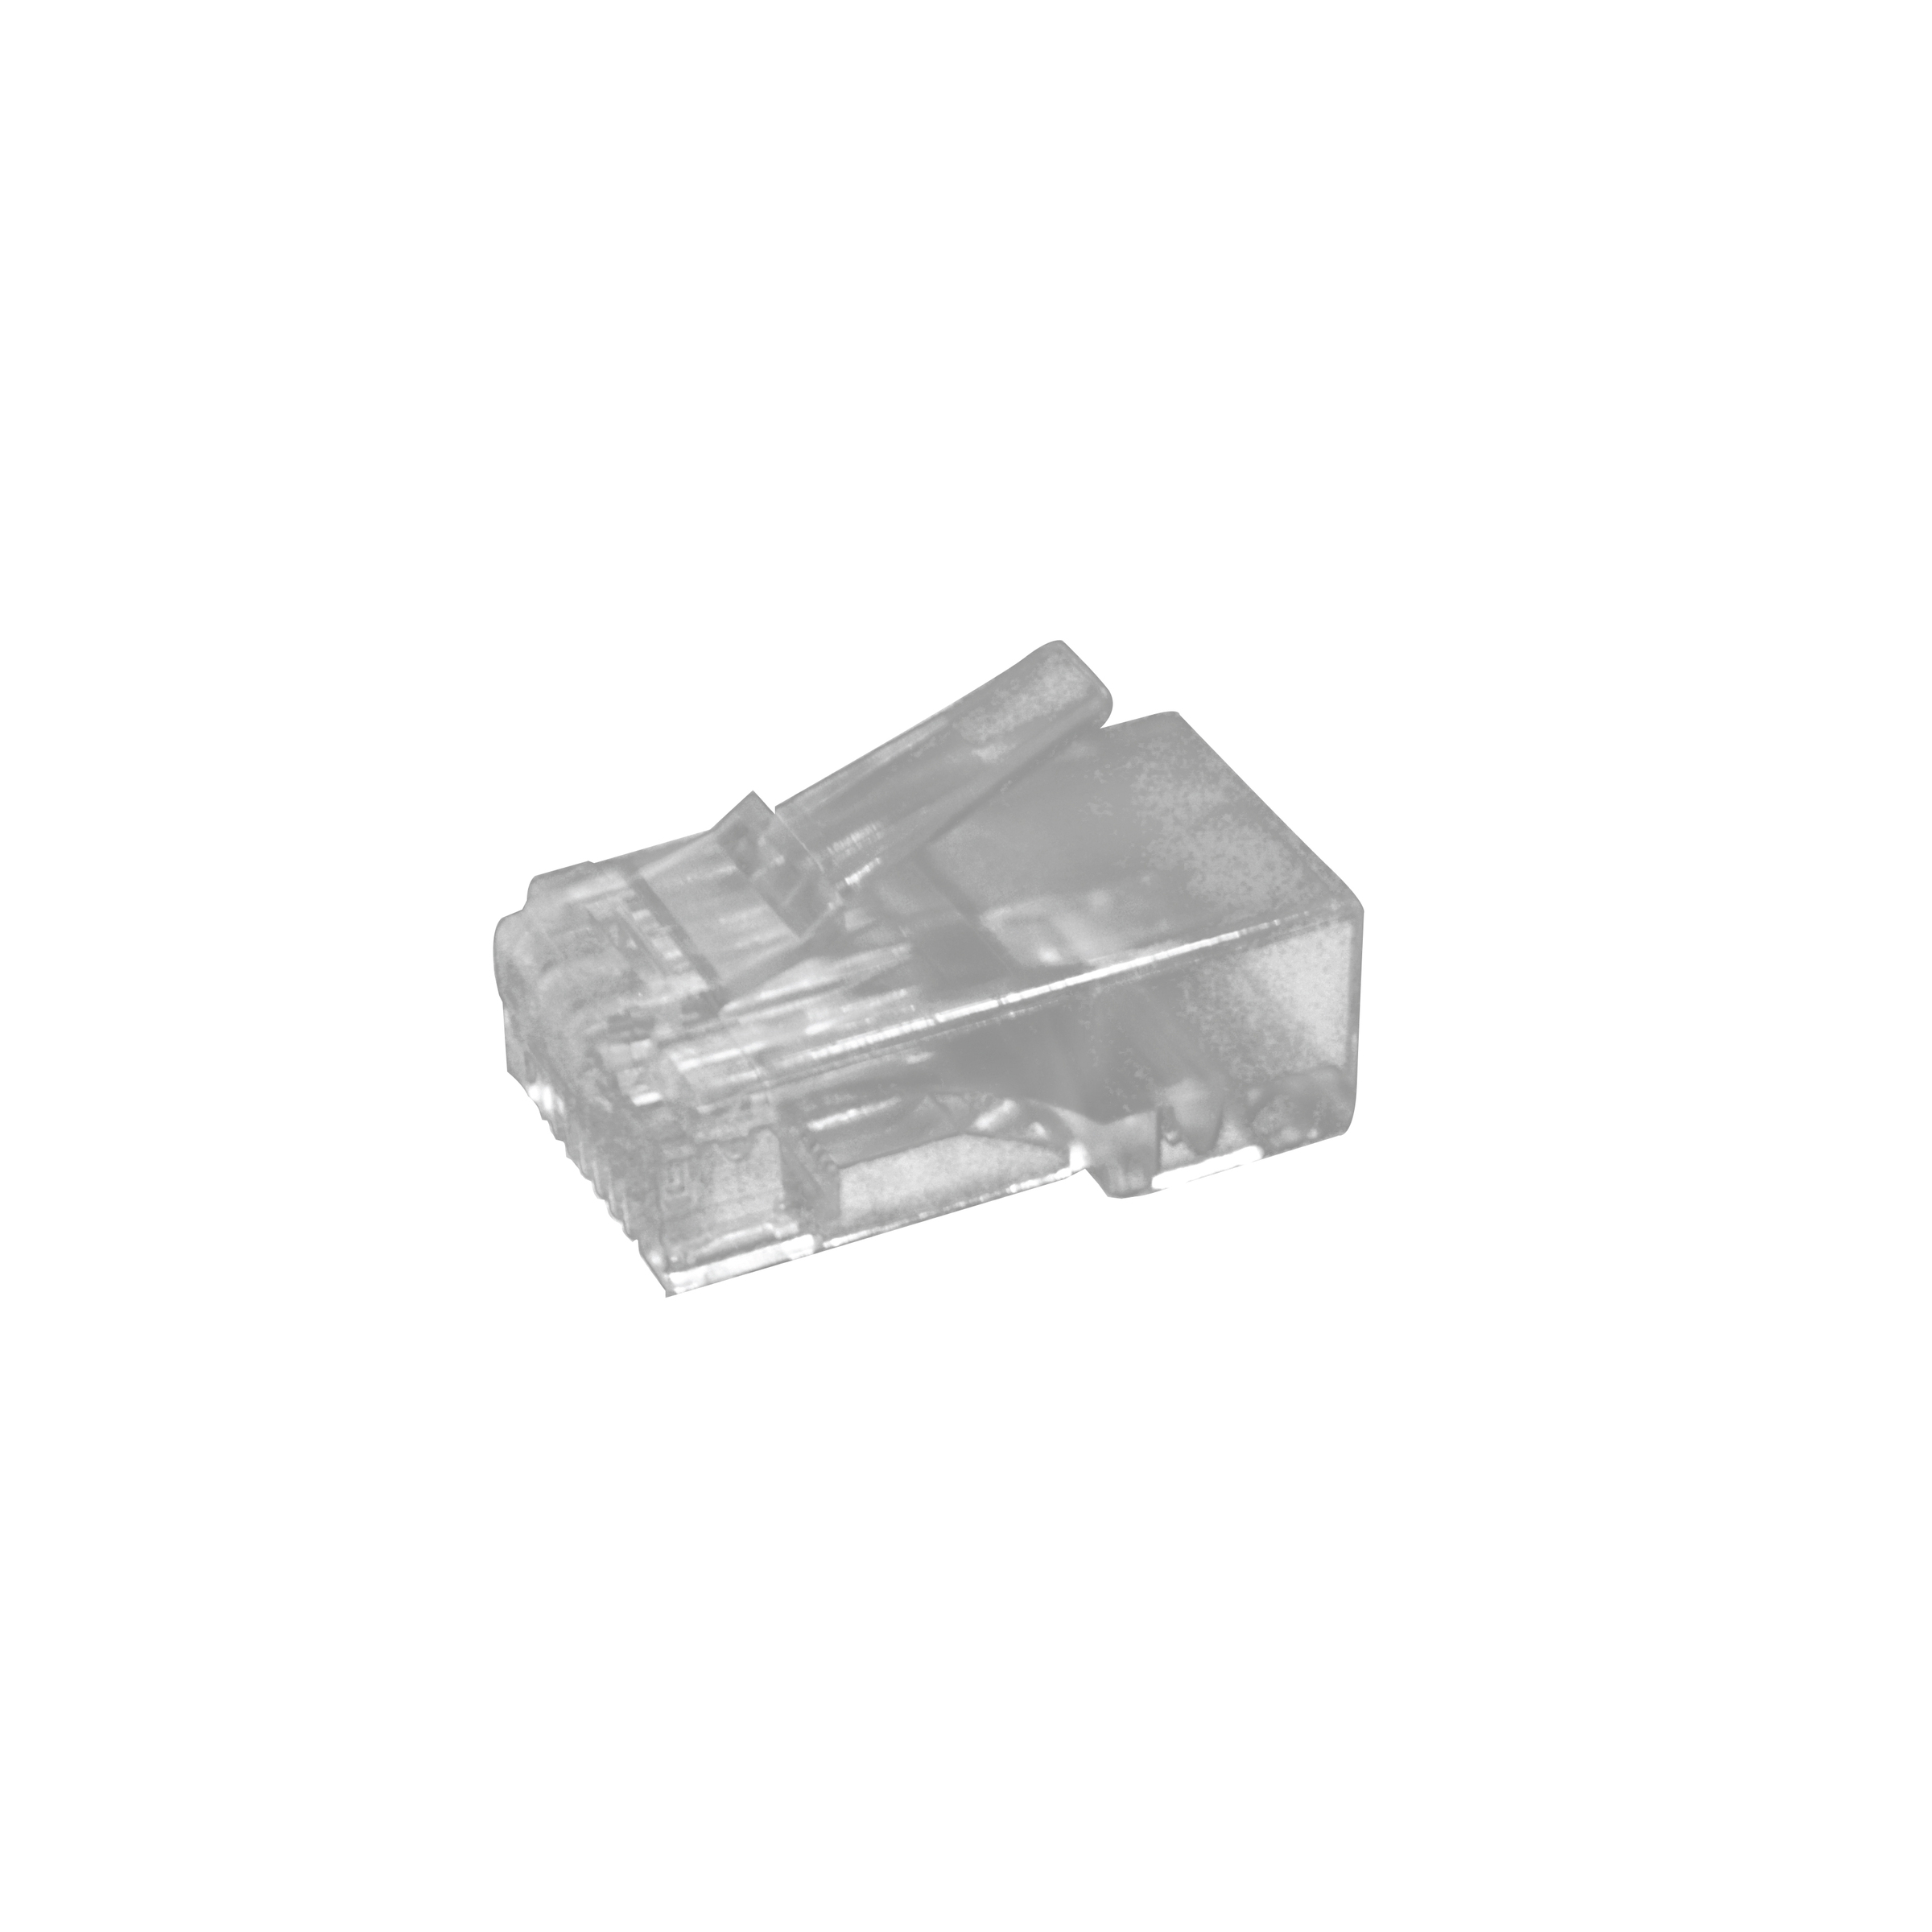 Structured Cabling Solution_RJ45 Modular Plug_Cat6 Modular Plug Unshielded Without Insert - WH.jpg